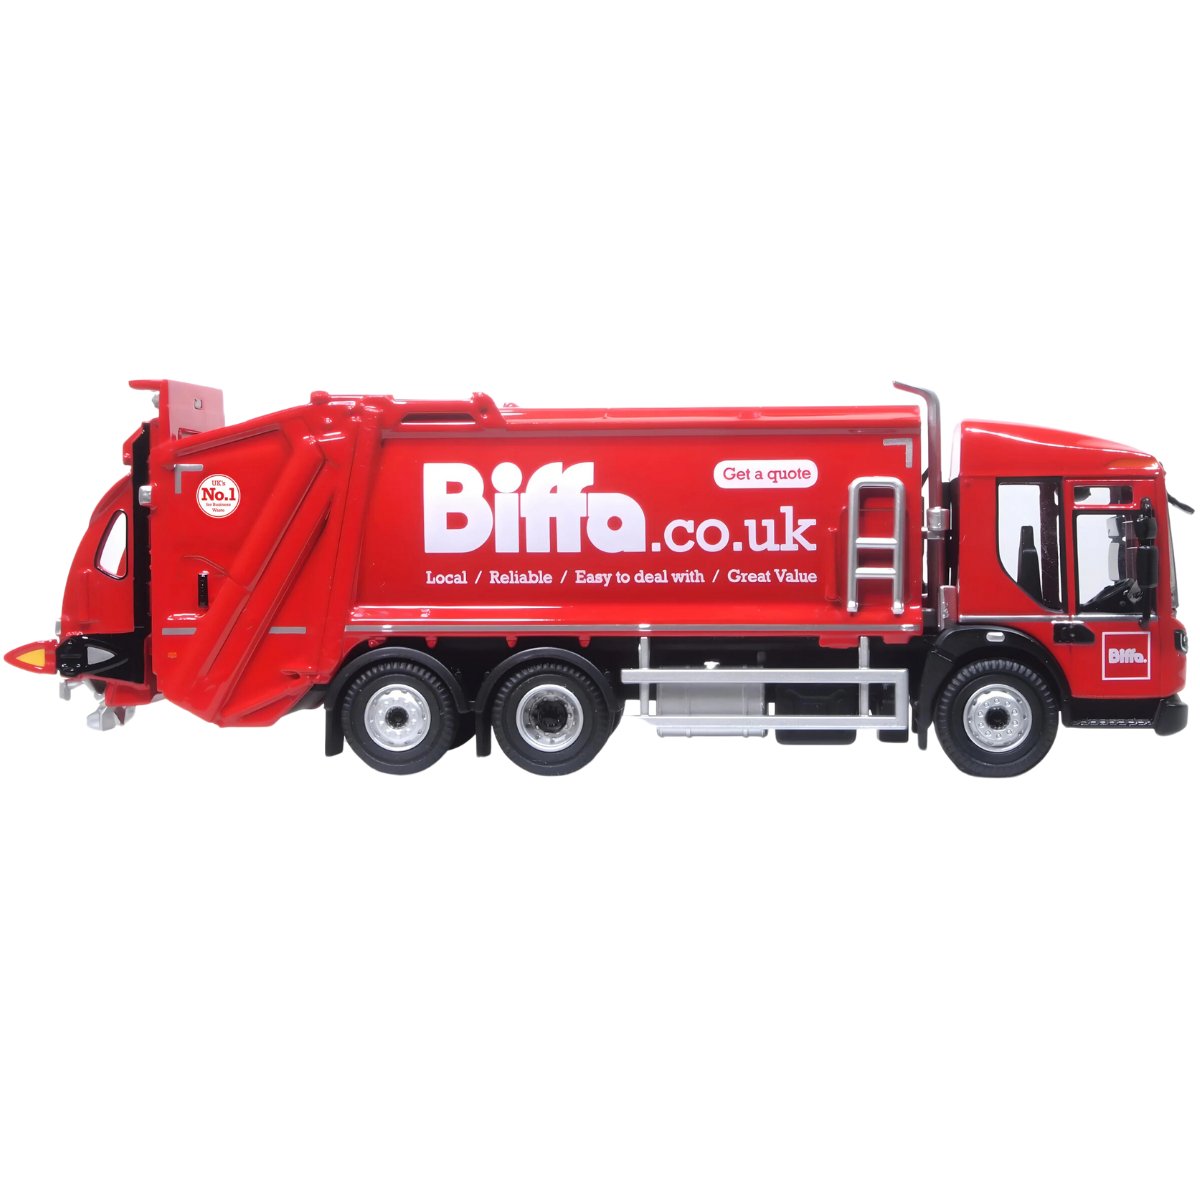 1:76 Scale Refuse Truck from Oxford Diecast. Livery Biffa